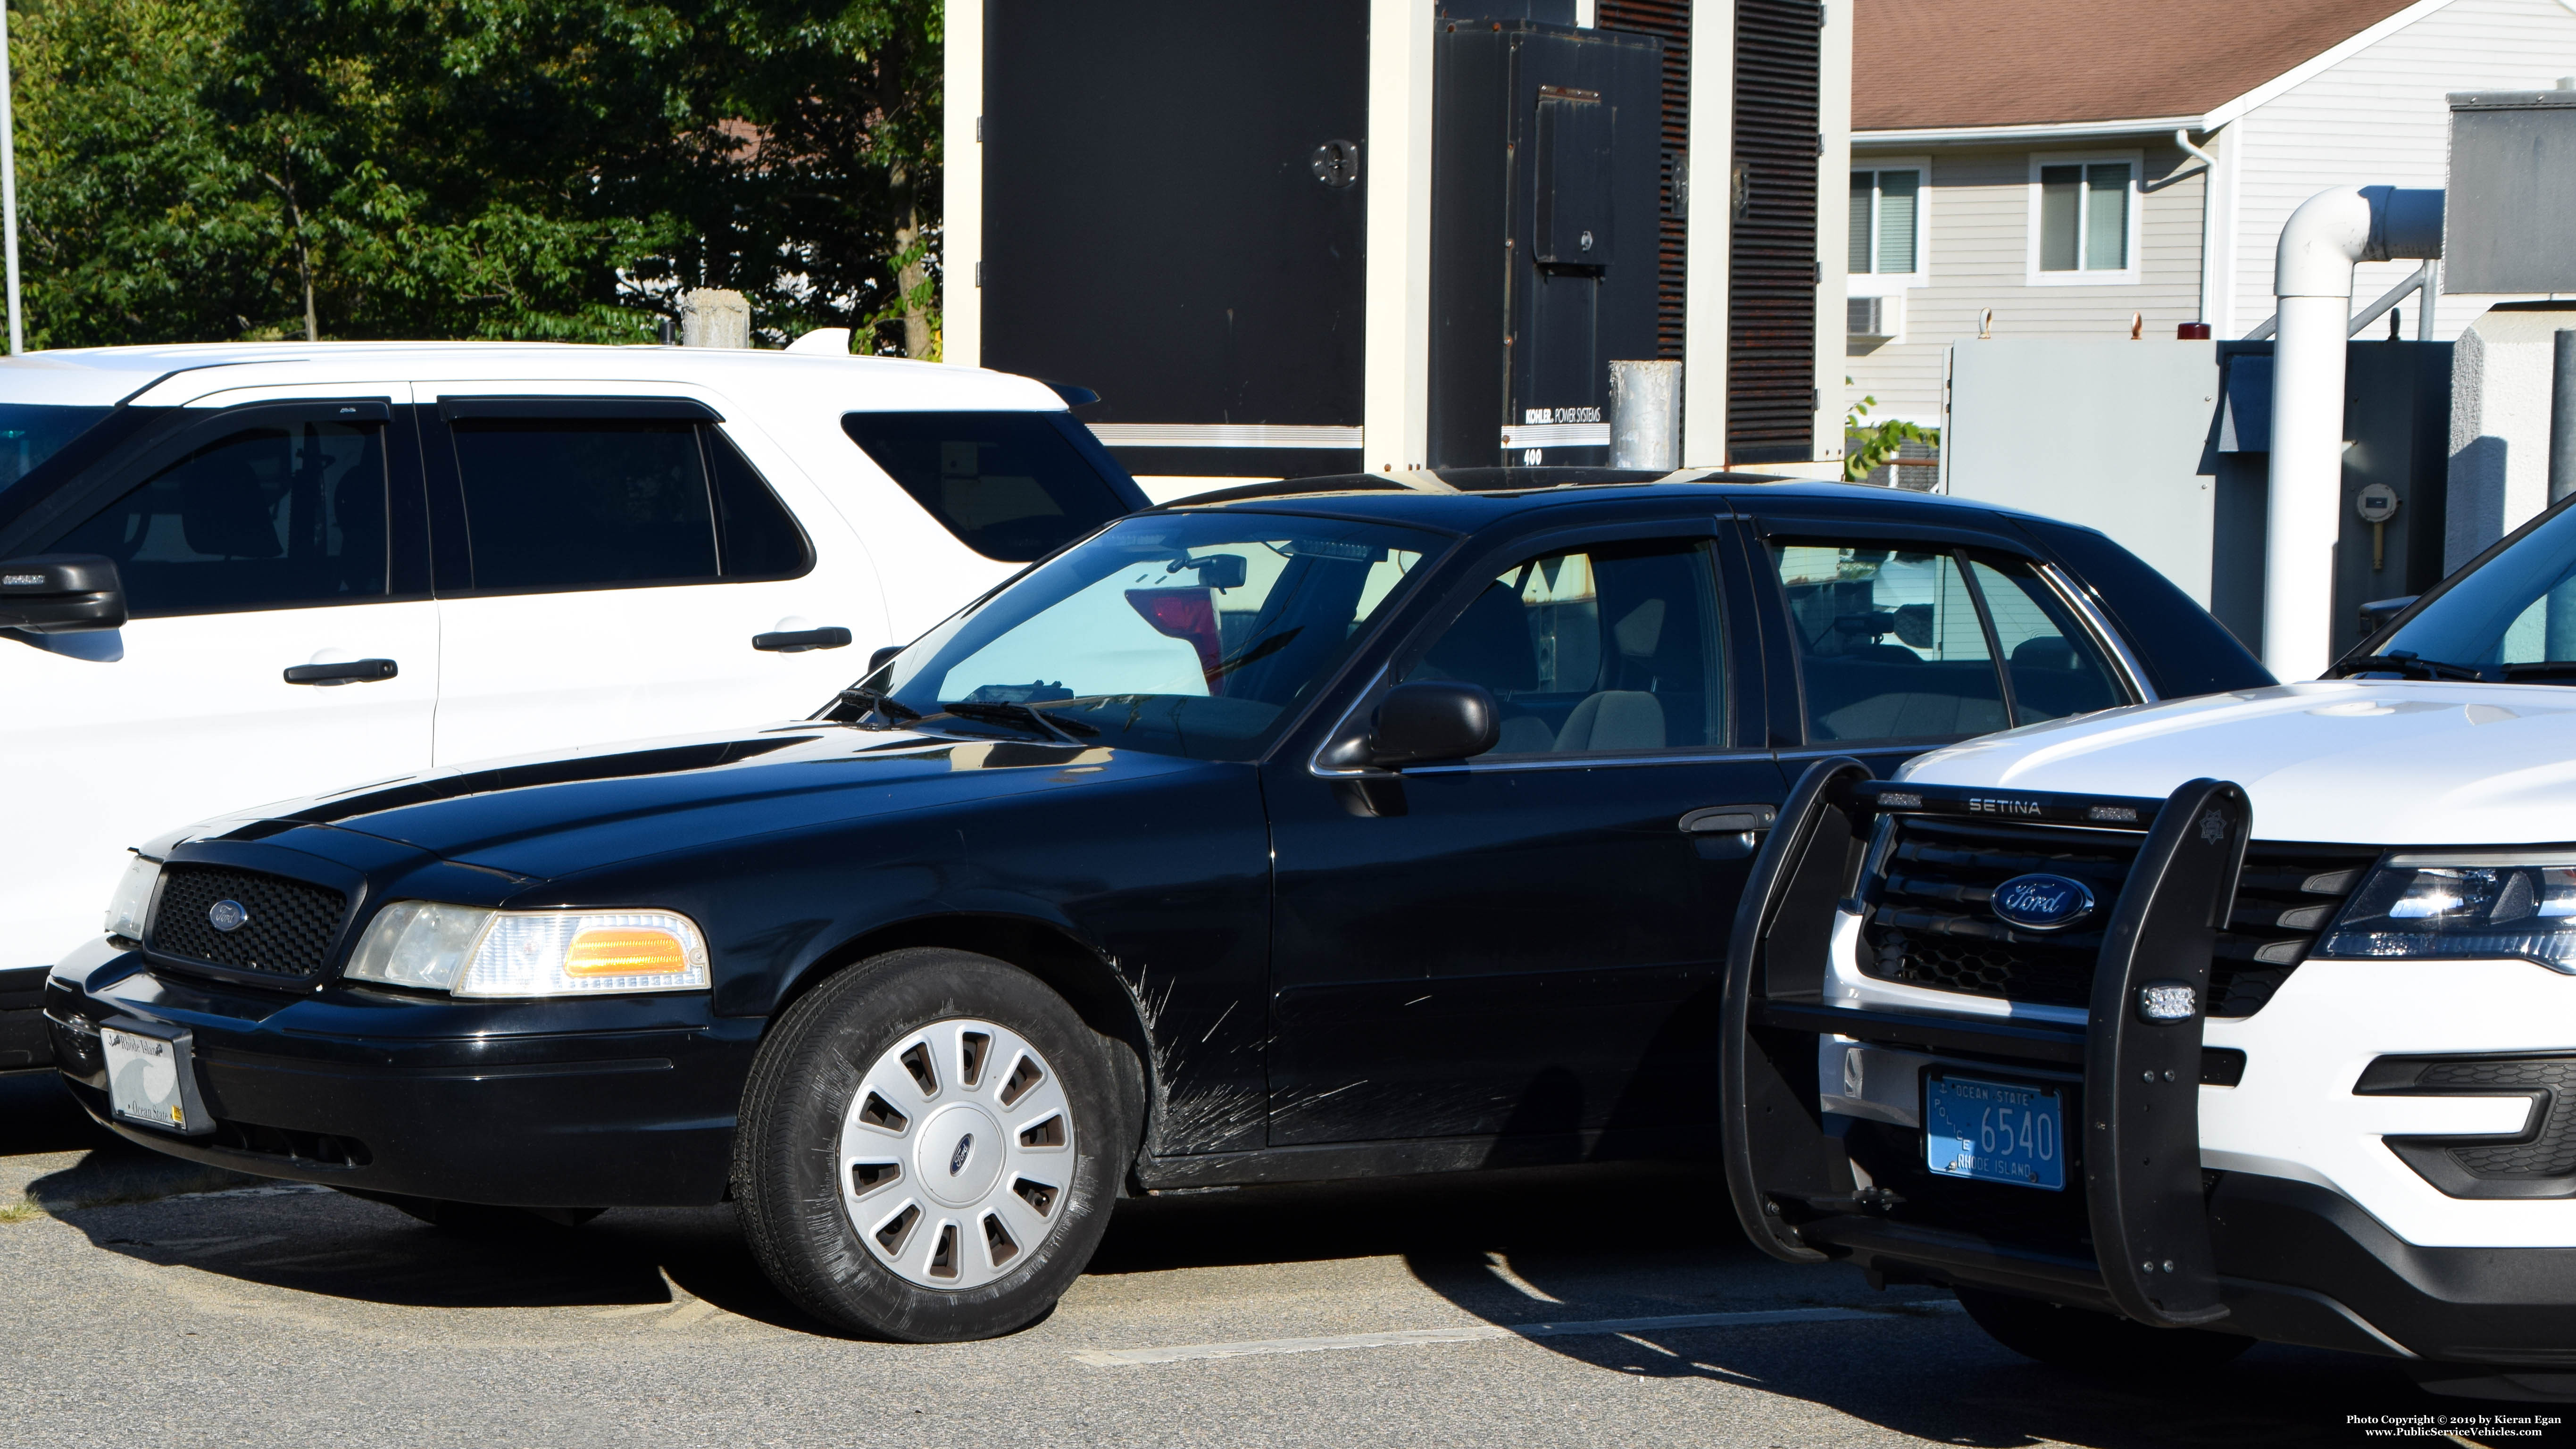 A photo  of North Kingstown Police
            Unmarked Unit, a 2006-2008 Ford Crown Victoria Police Interceptor             taken by Kieran Egan